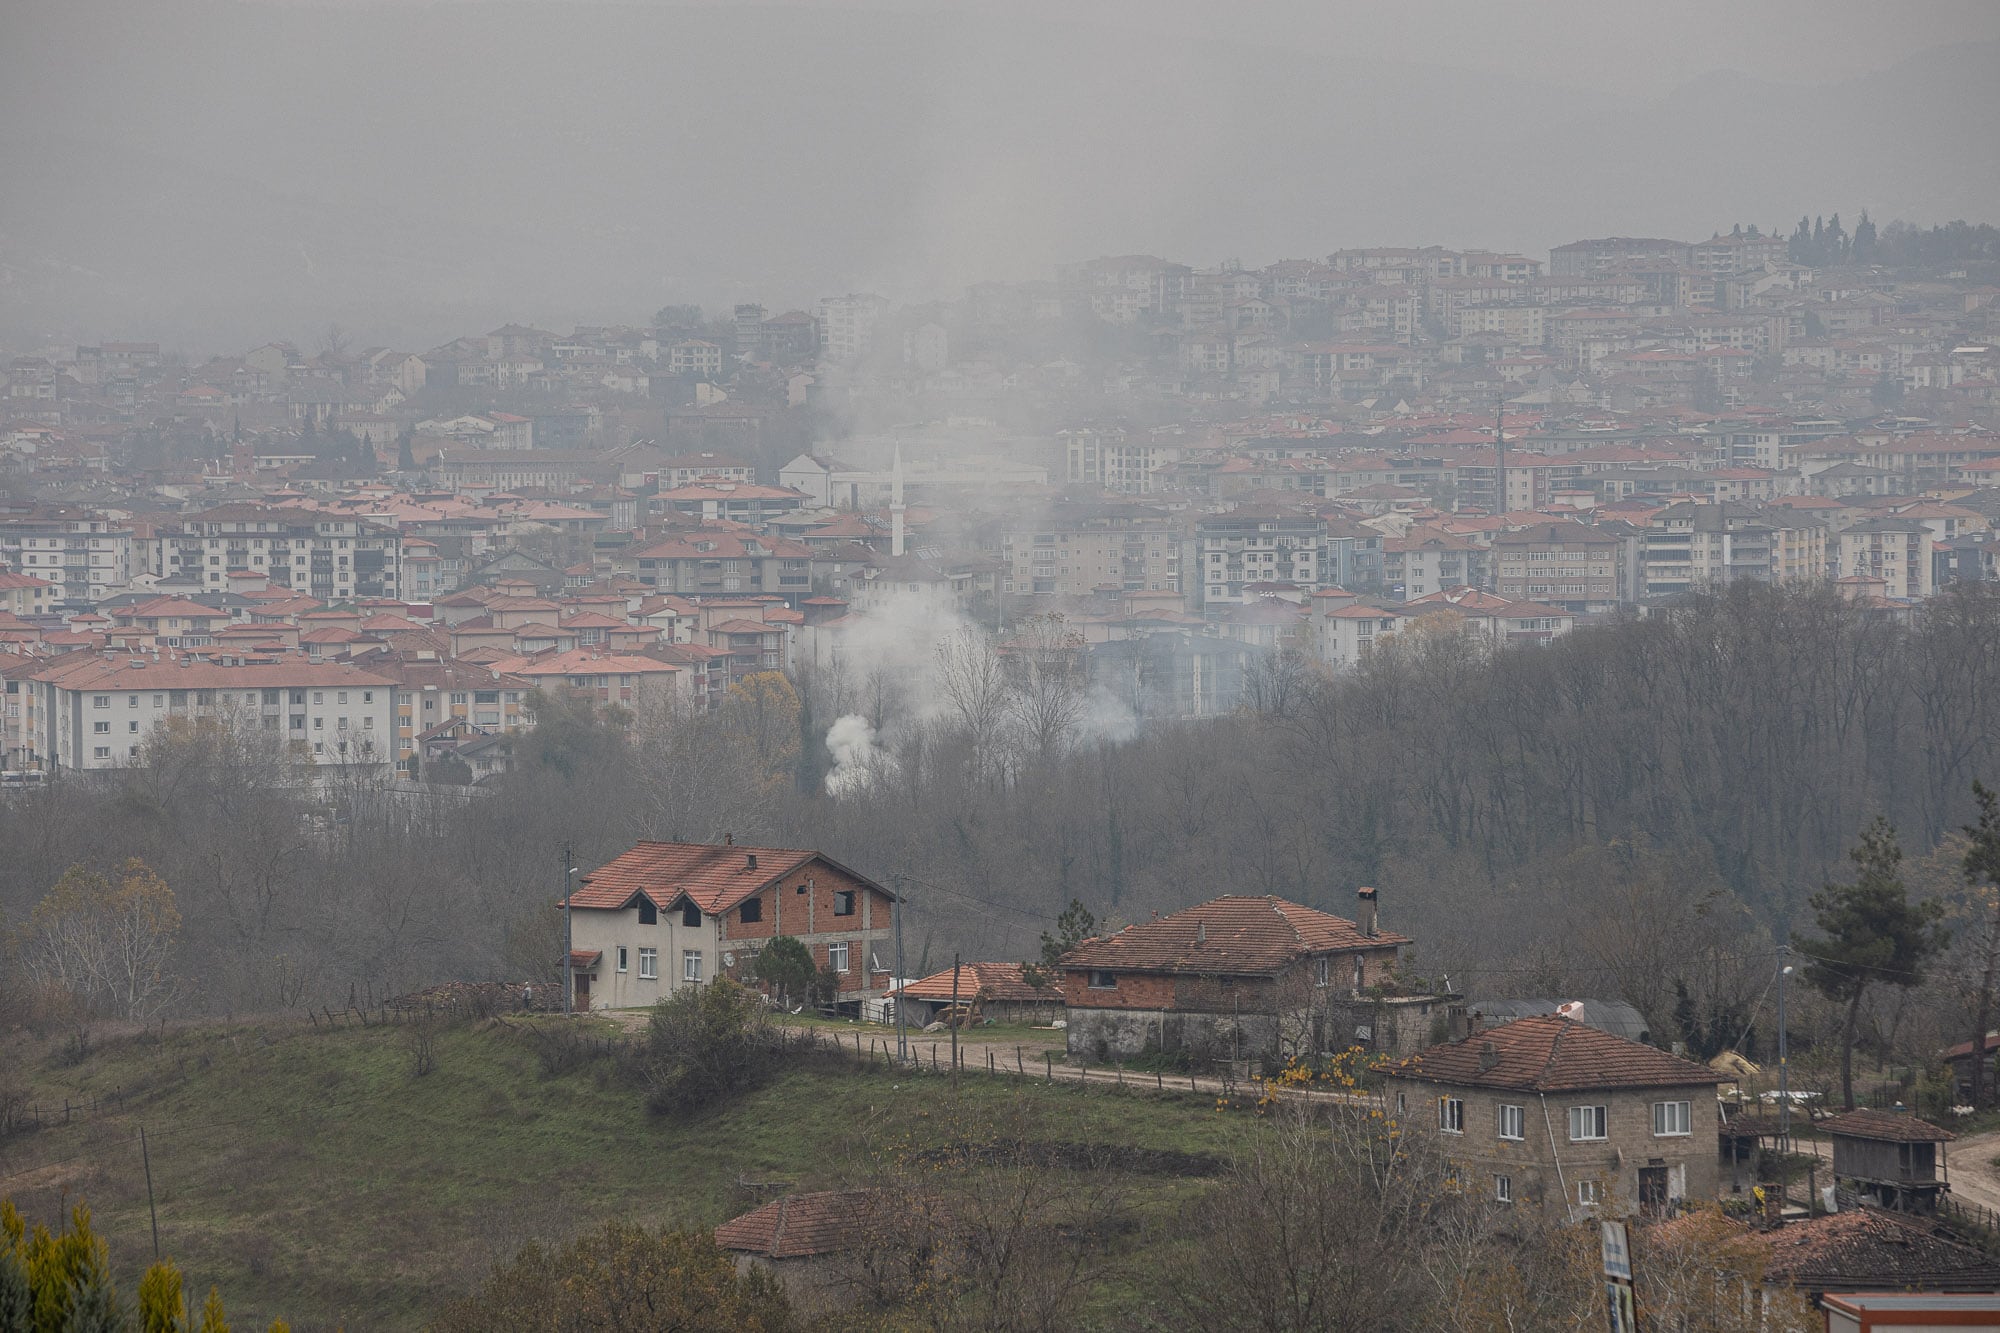 Bartin from a distance